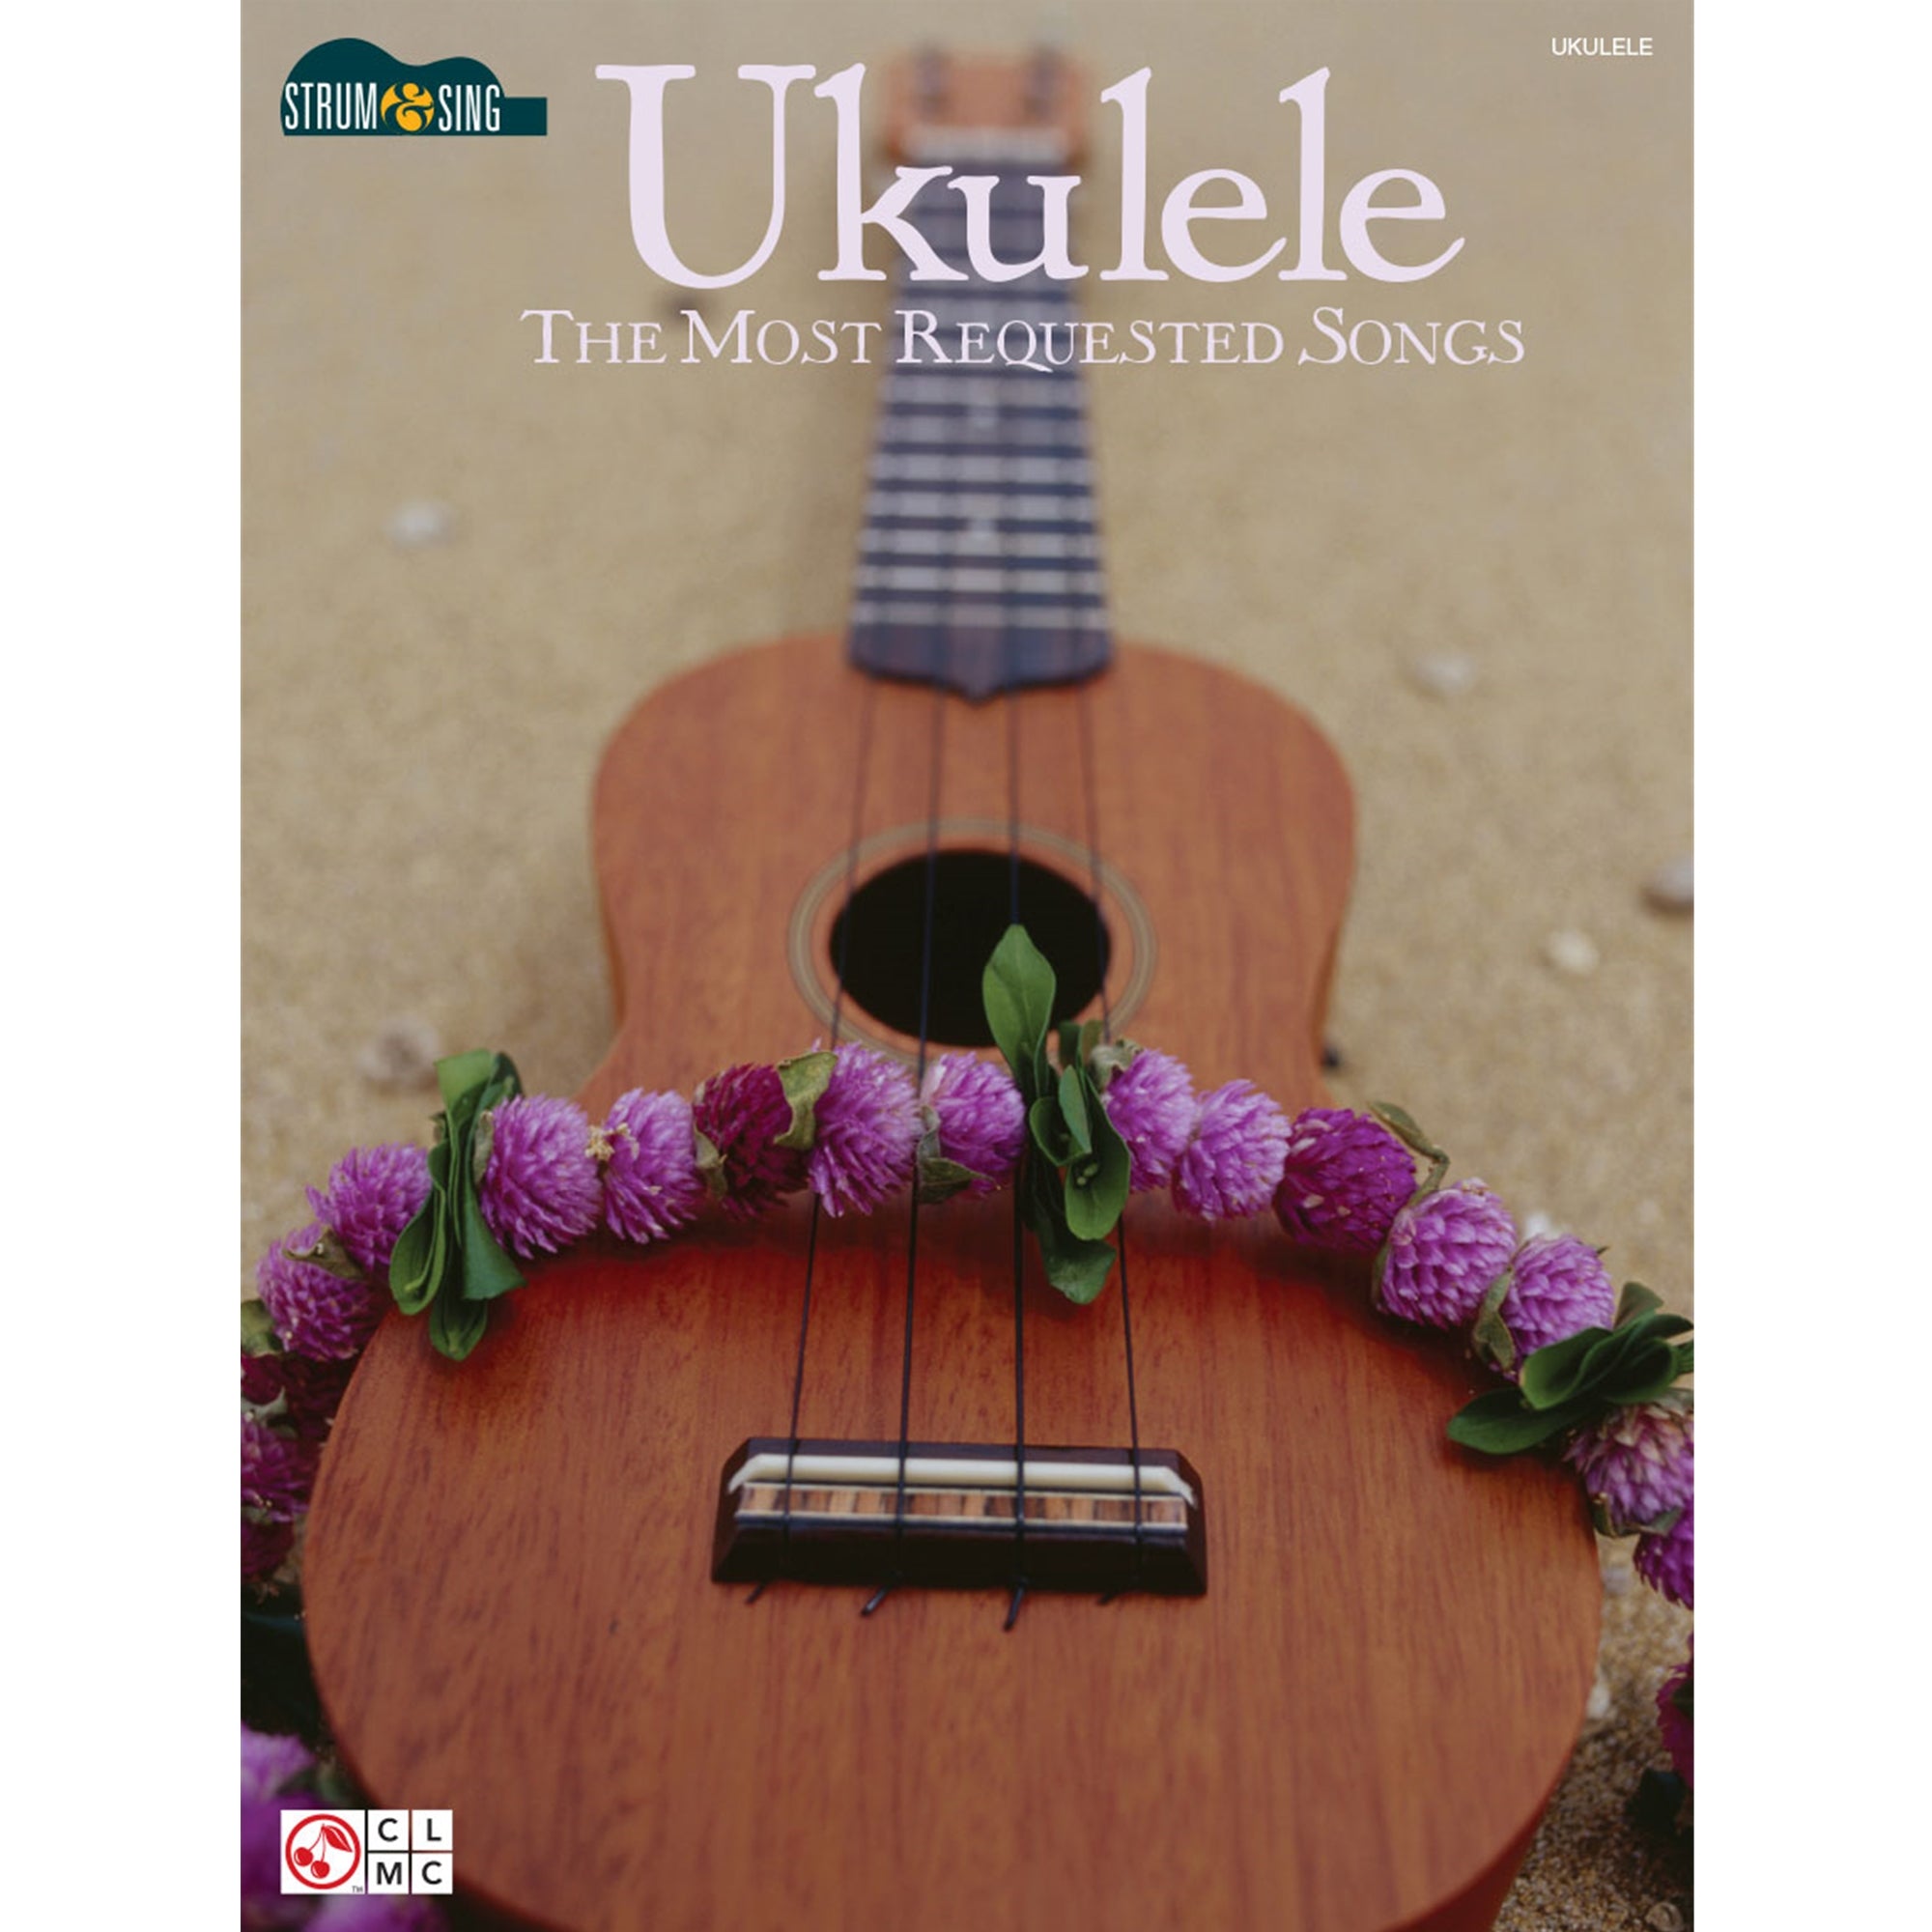 CHERRY LANE 2501453 Ukulele - The Most Requested Songs